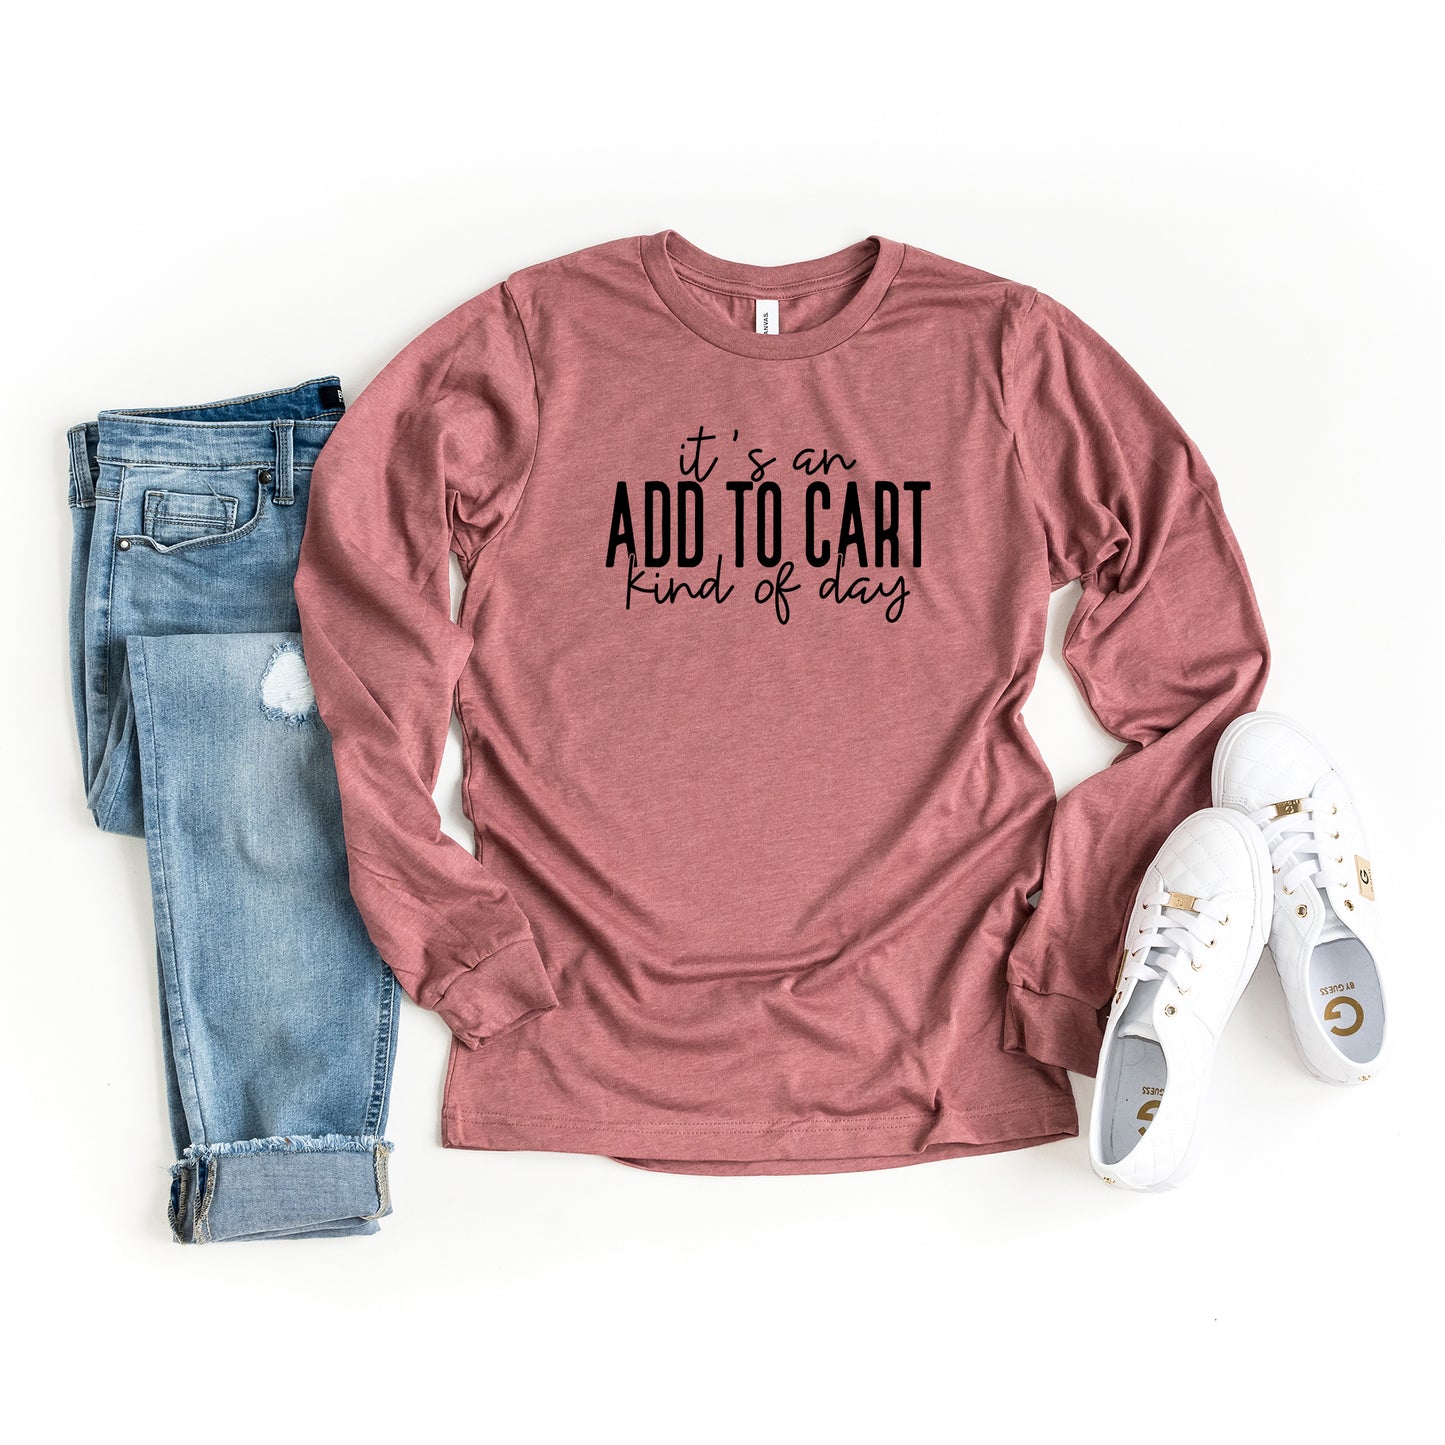 Add To Cart Kind Of Day | Long Sleeve Graphic Tee